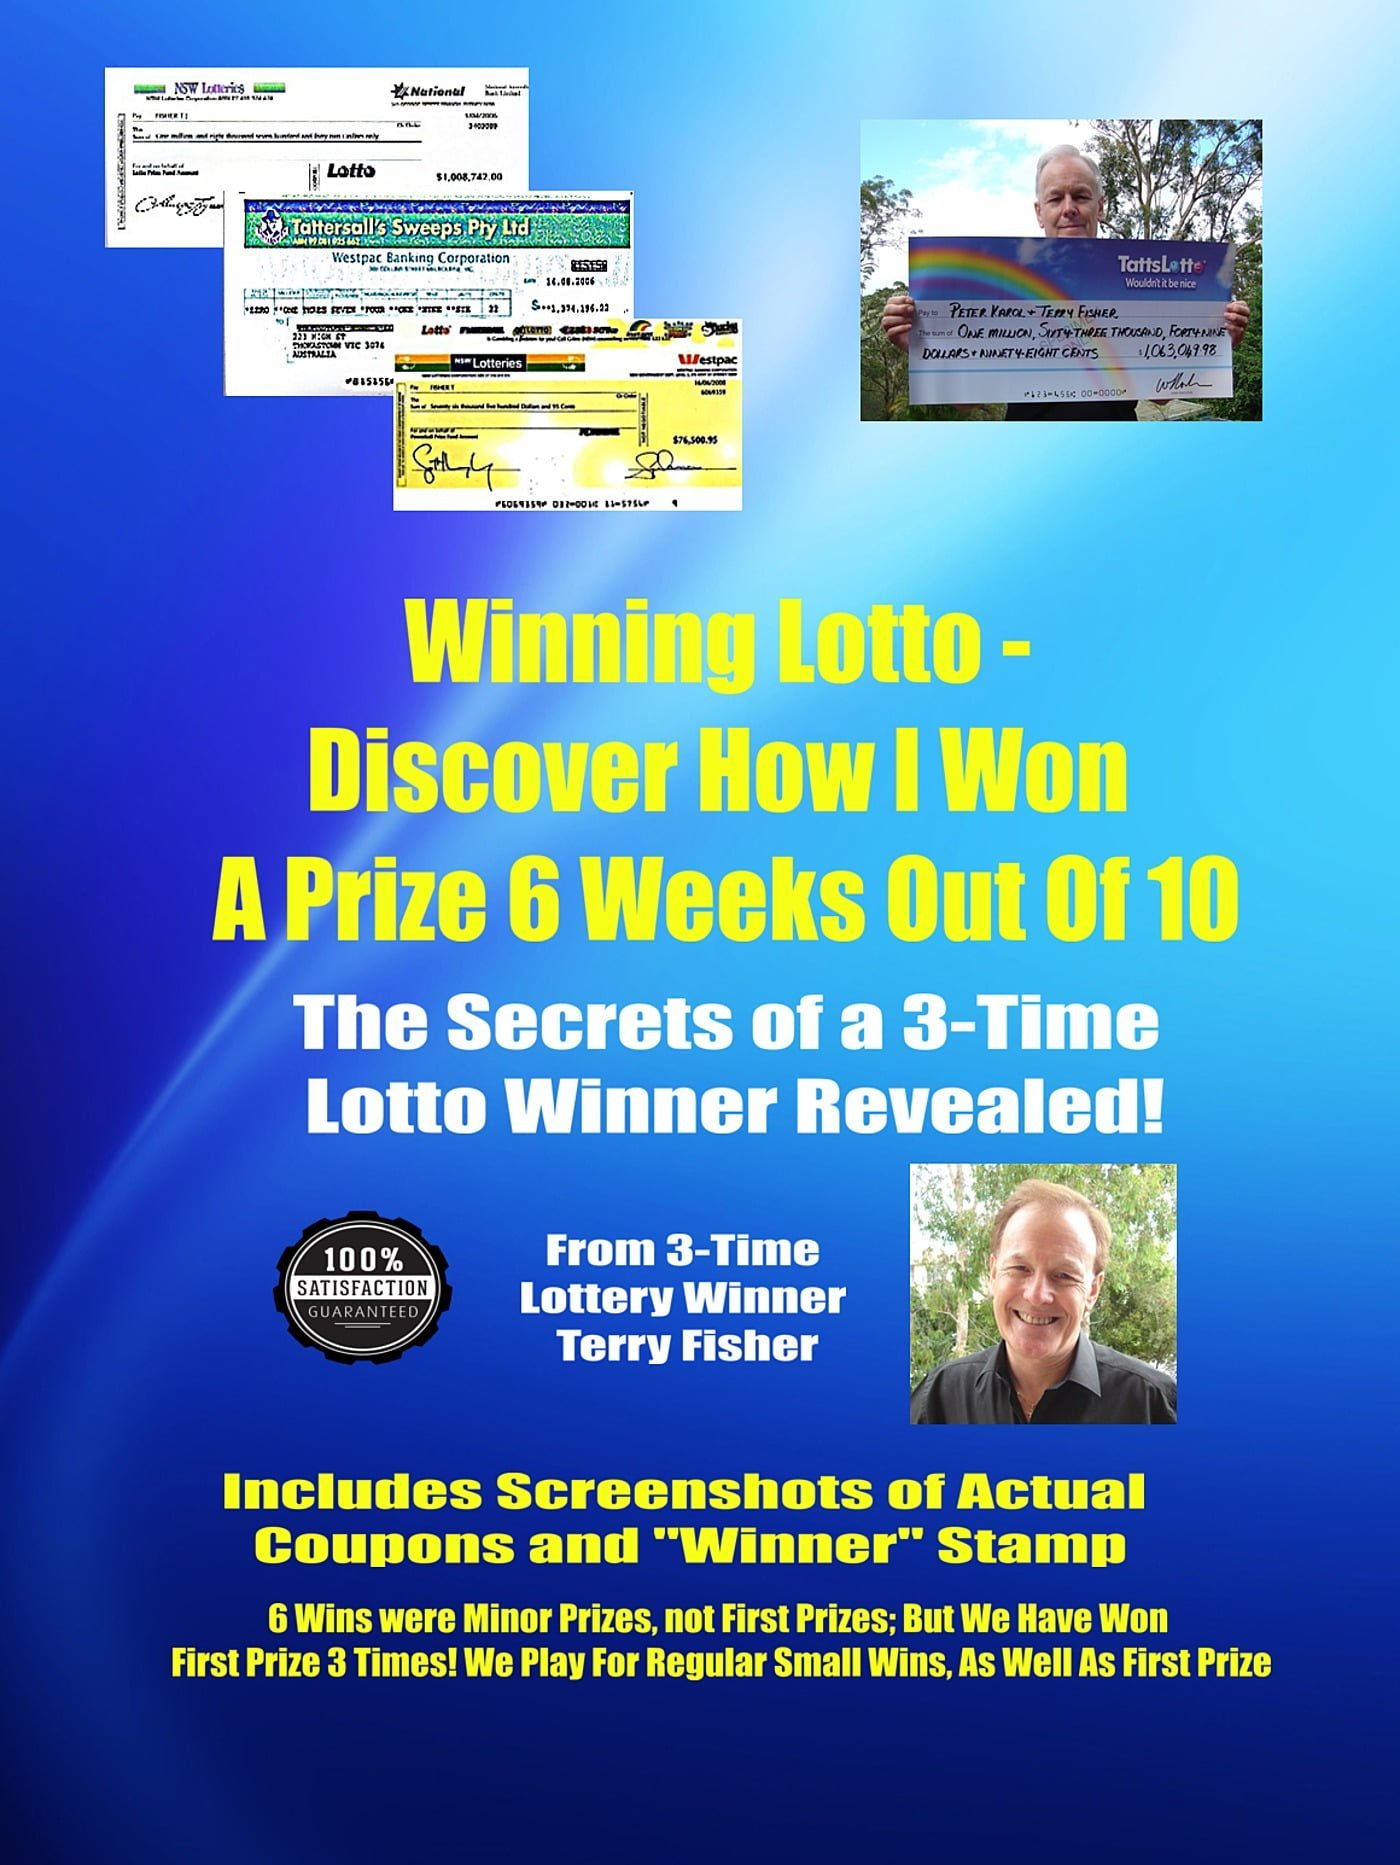 Winning Lotto - Discover How I Won a Prize 6 Weeks Out Of 10